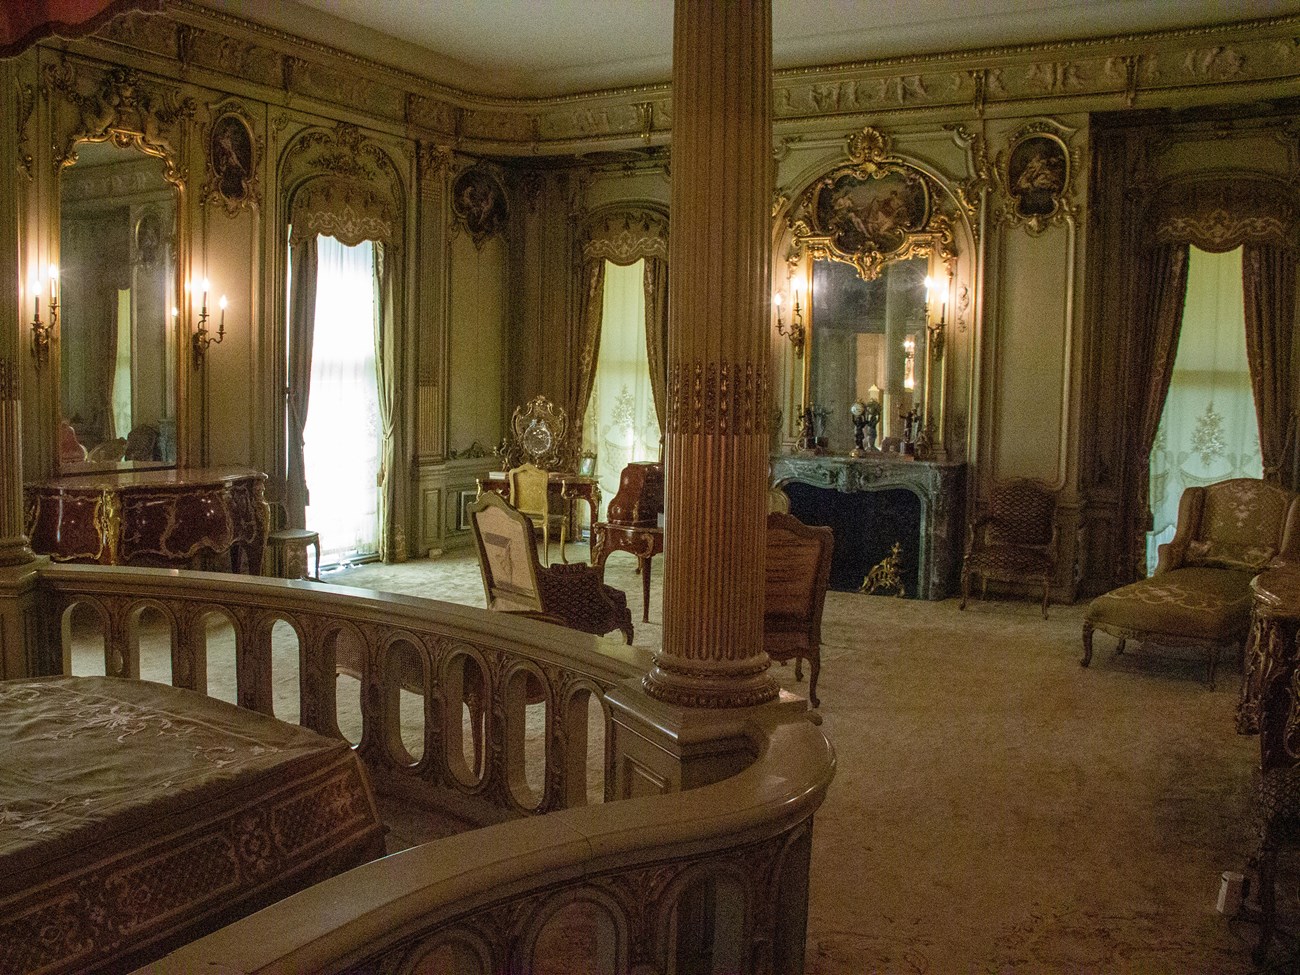 A grand bedroom with central fireplace and French gilt furnishings.